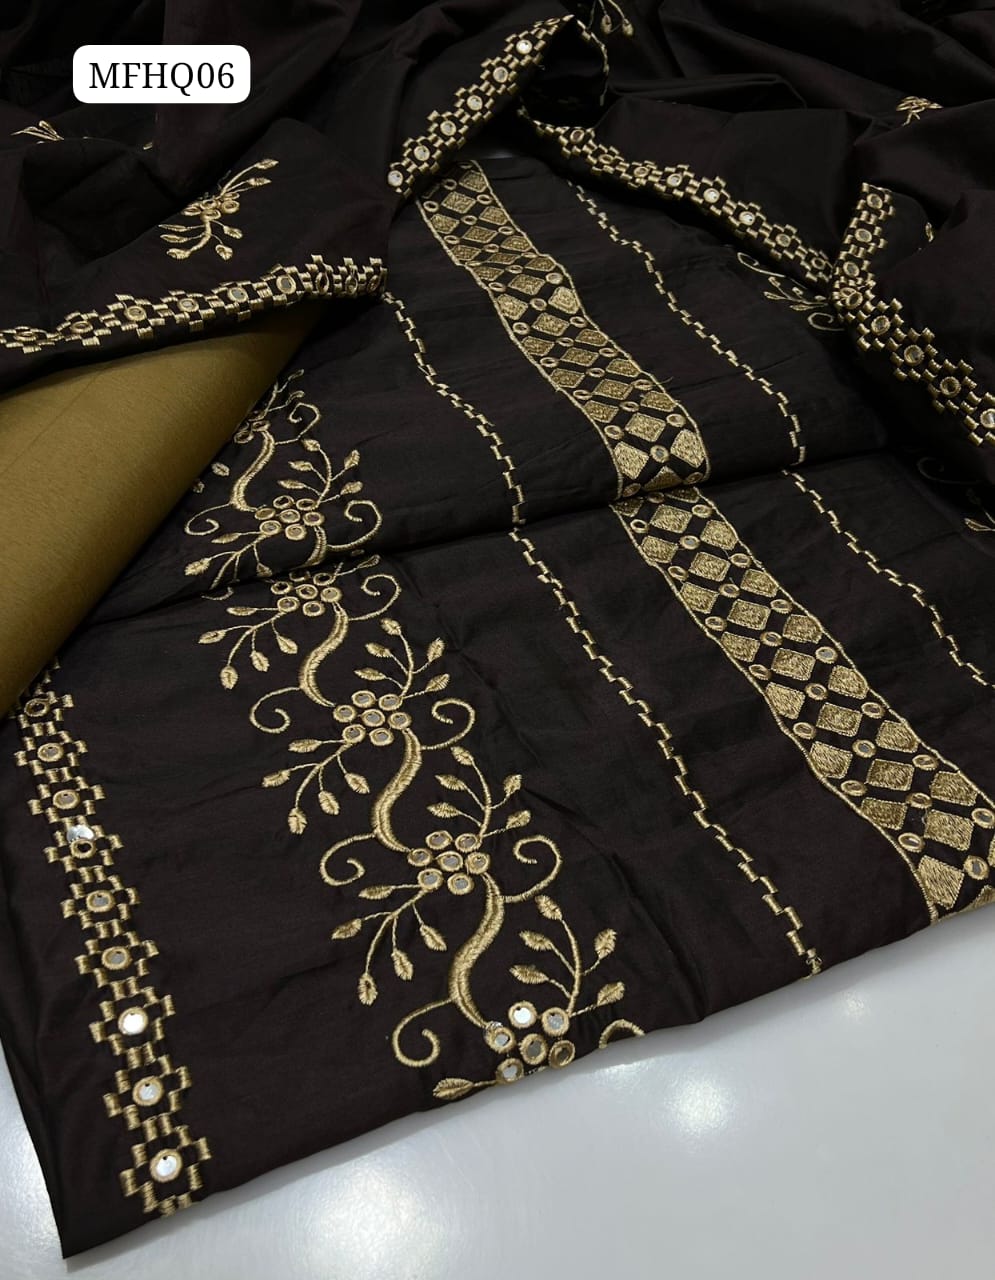 Paper Cotton Fabric Cross Stitch 9 mm Embroidery Work Shirt With Dupatta Paper Cotton Cross Stitch Karhai And Kataan Silk Embroidery Work Trouser 3Pc Dress